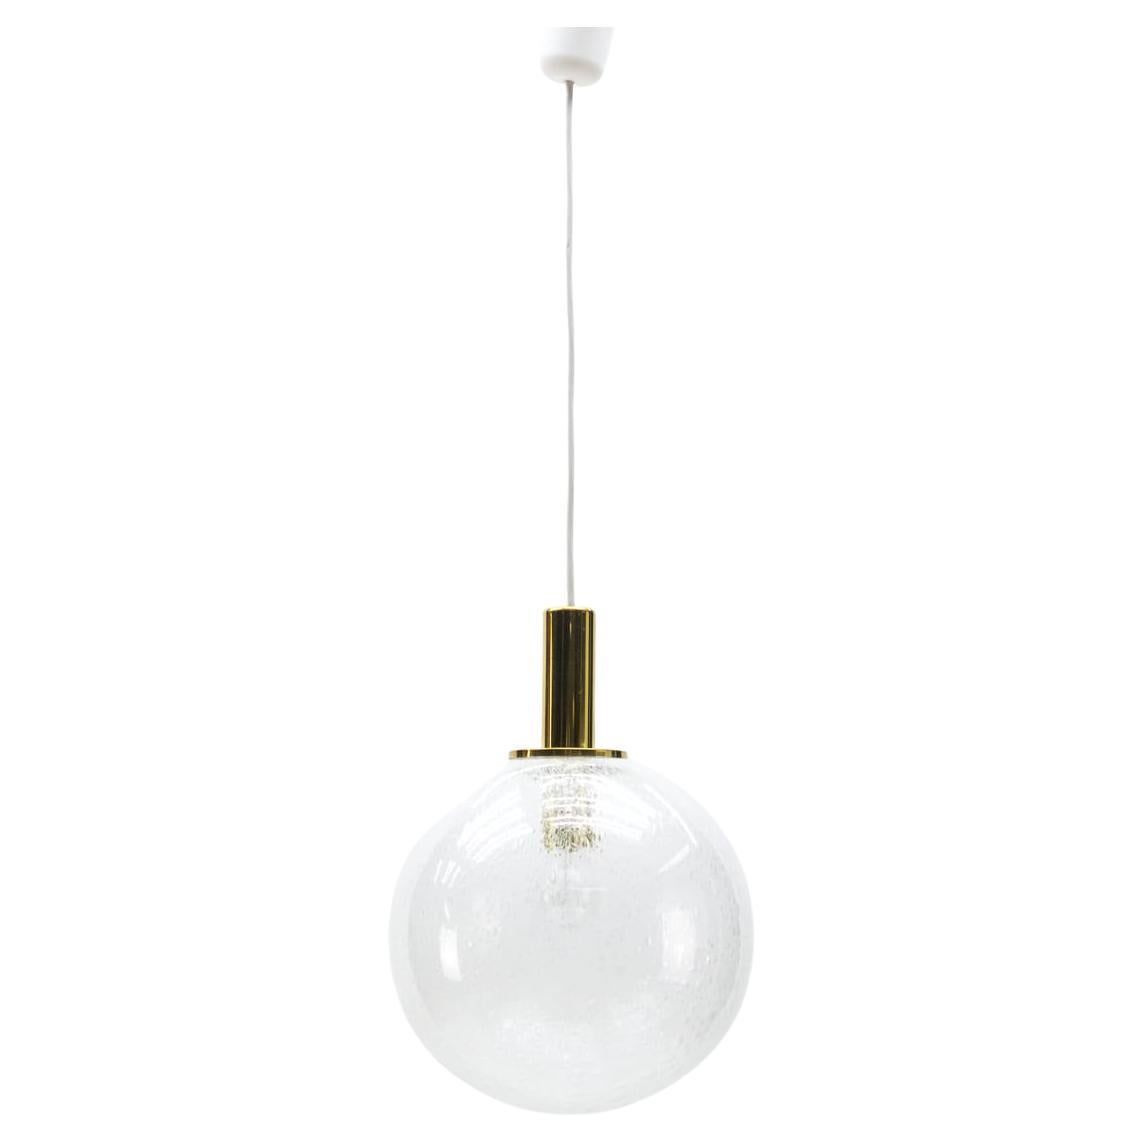 Very Elegant Brass and Blown Glass Globe Ceiling Lamp by Doria, Germany, 1960s For Sale